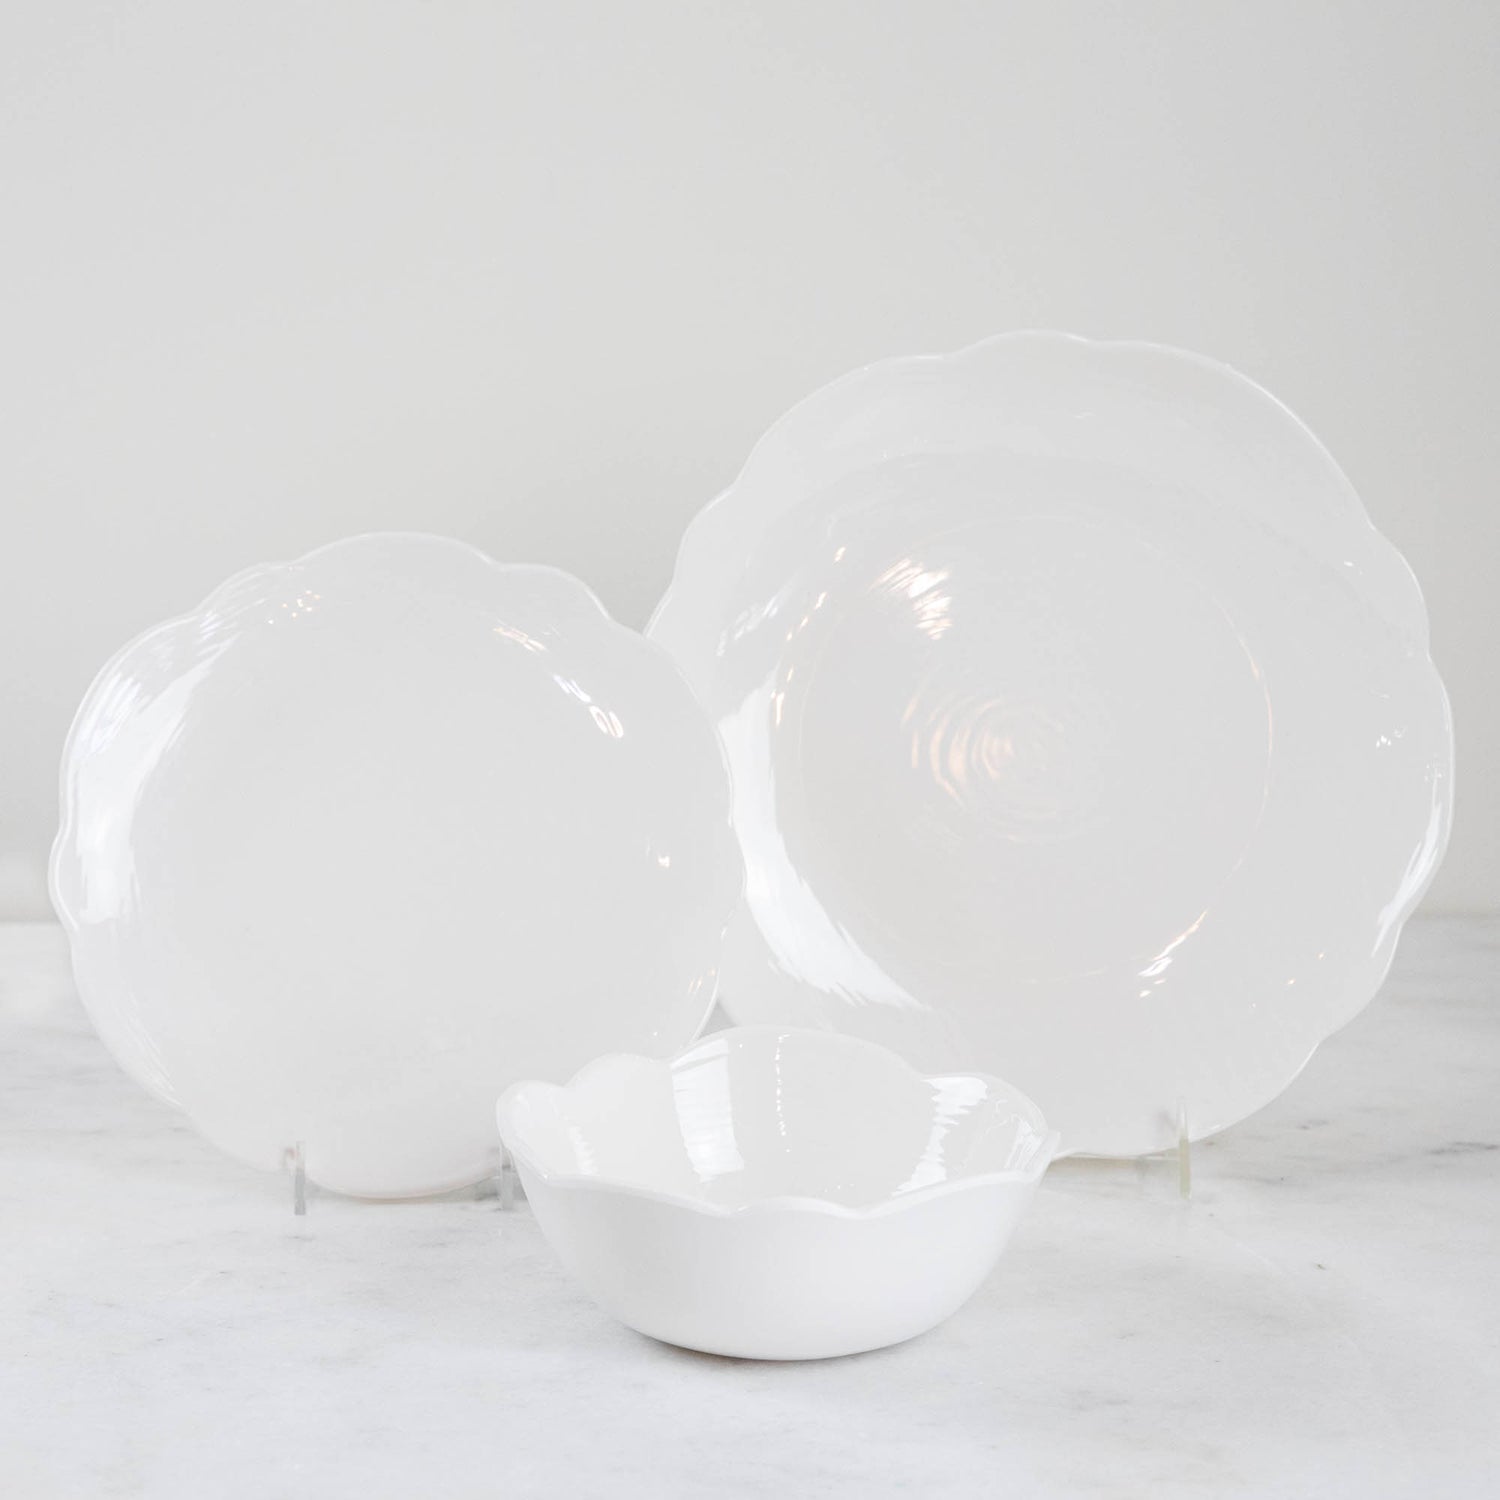 A set of Scallop Cream Dinner Plates by Relish Dinnerware on a marble table.